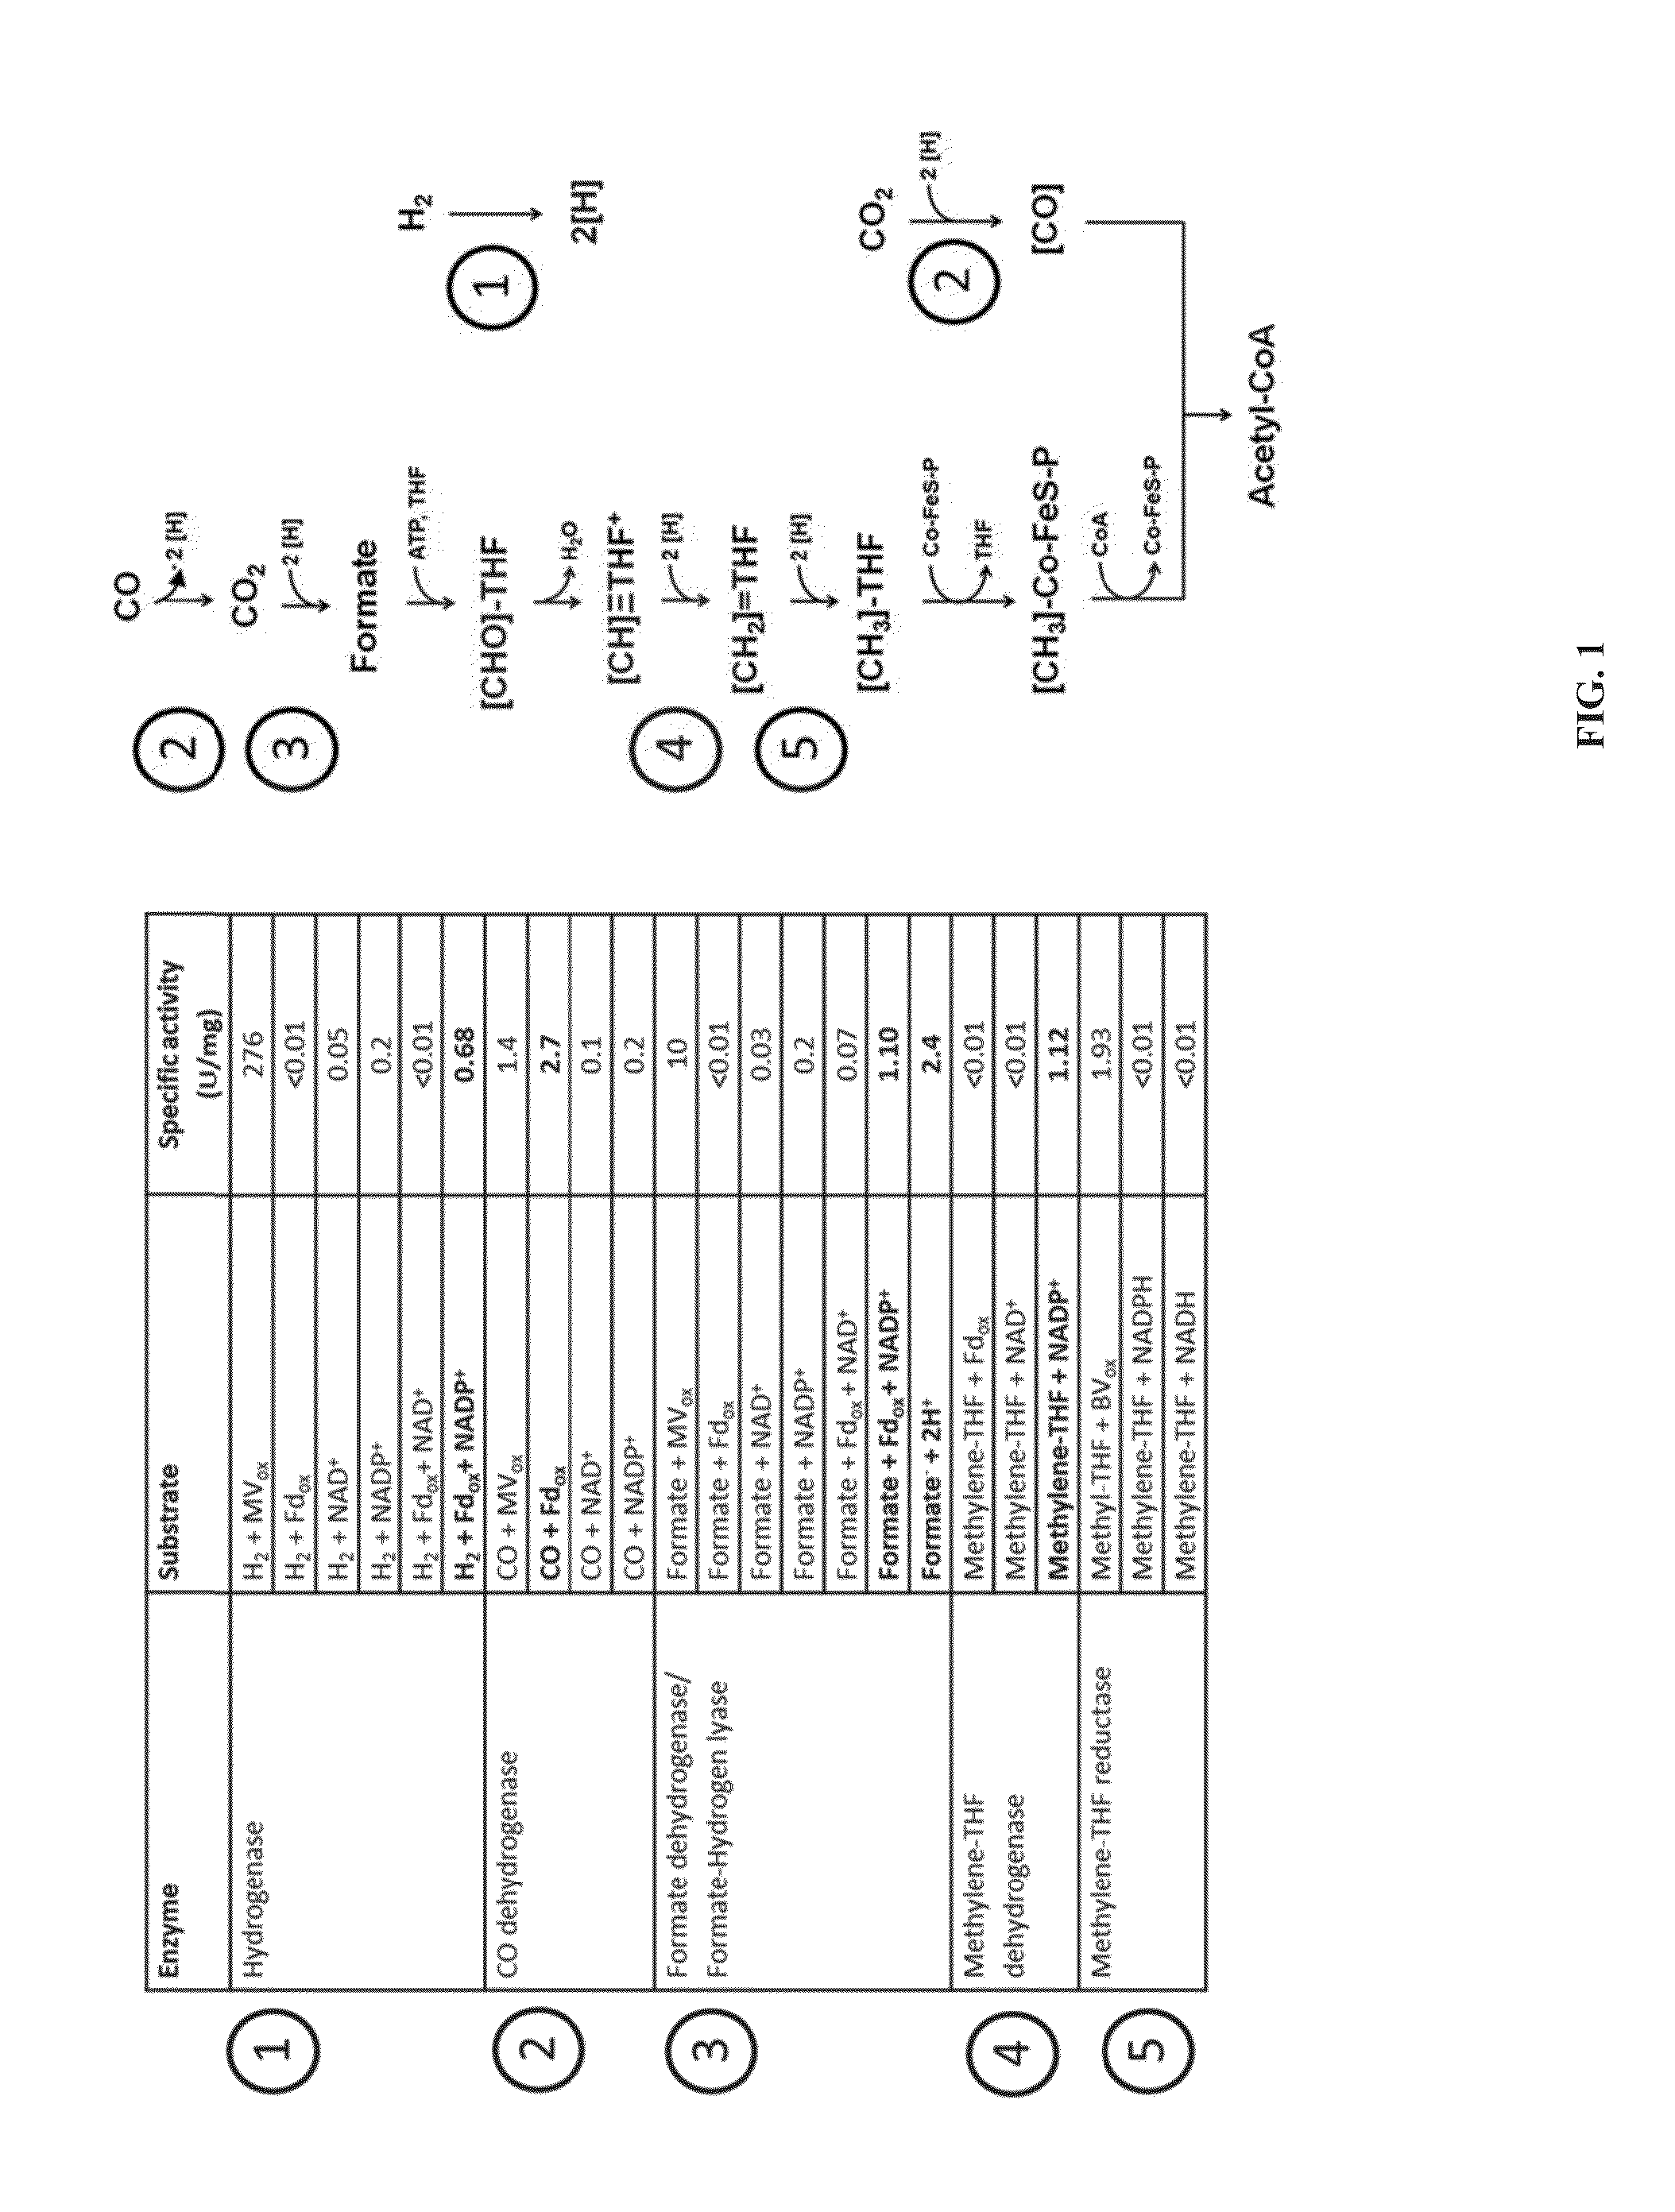 Recombinant microorganisms comprising NADPH dependent enzymes and methods of production therefor